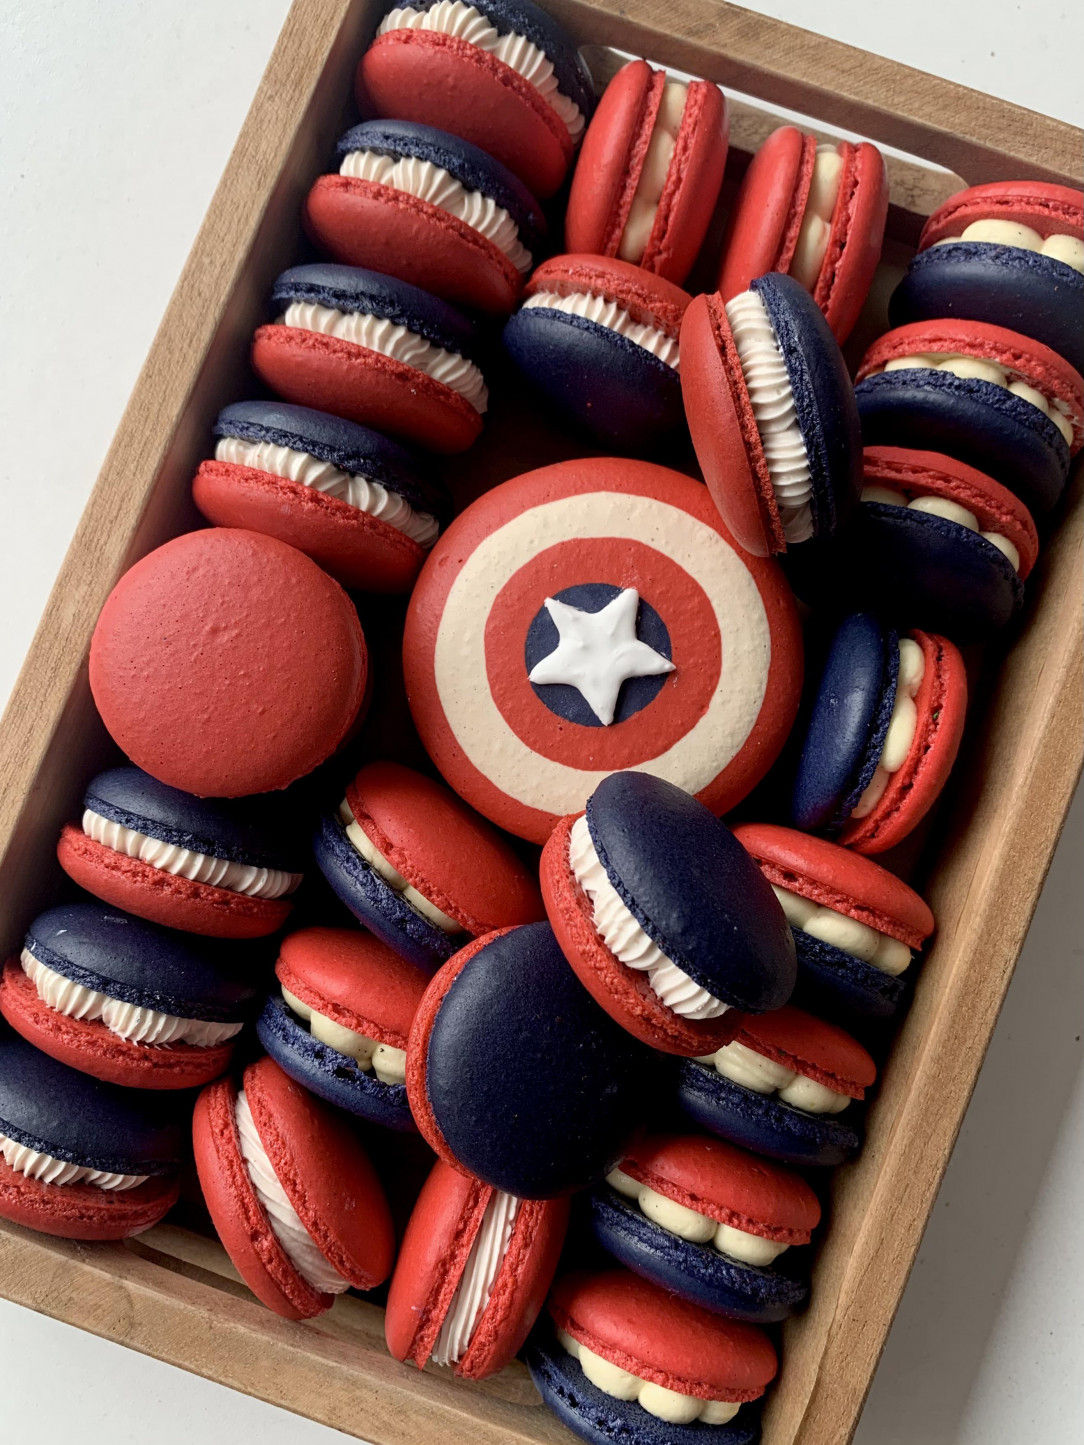 Red, white and blue macarons